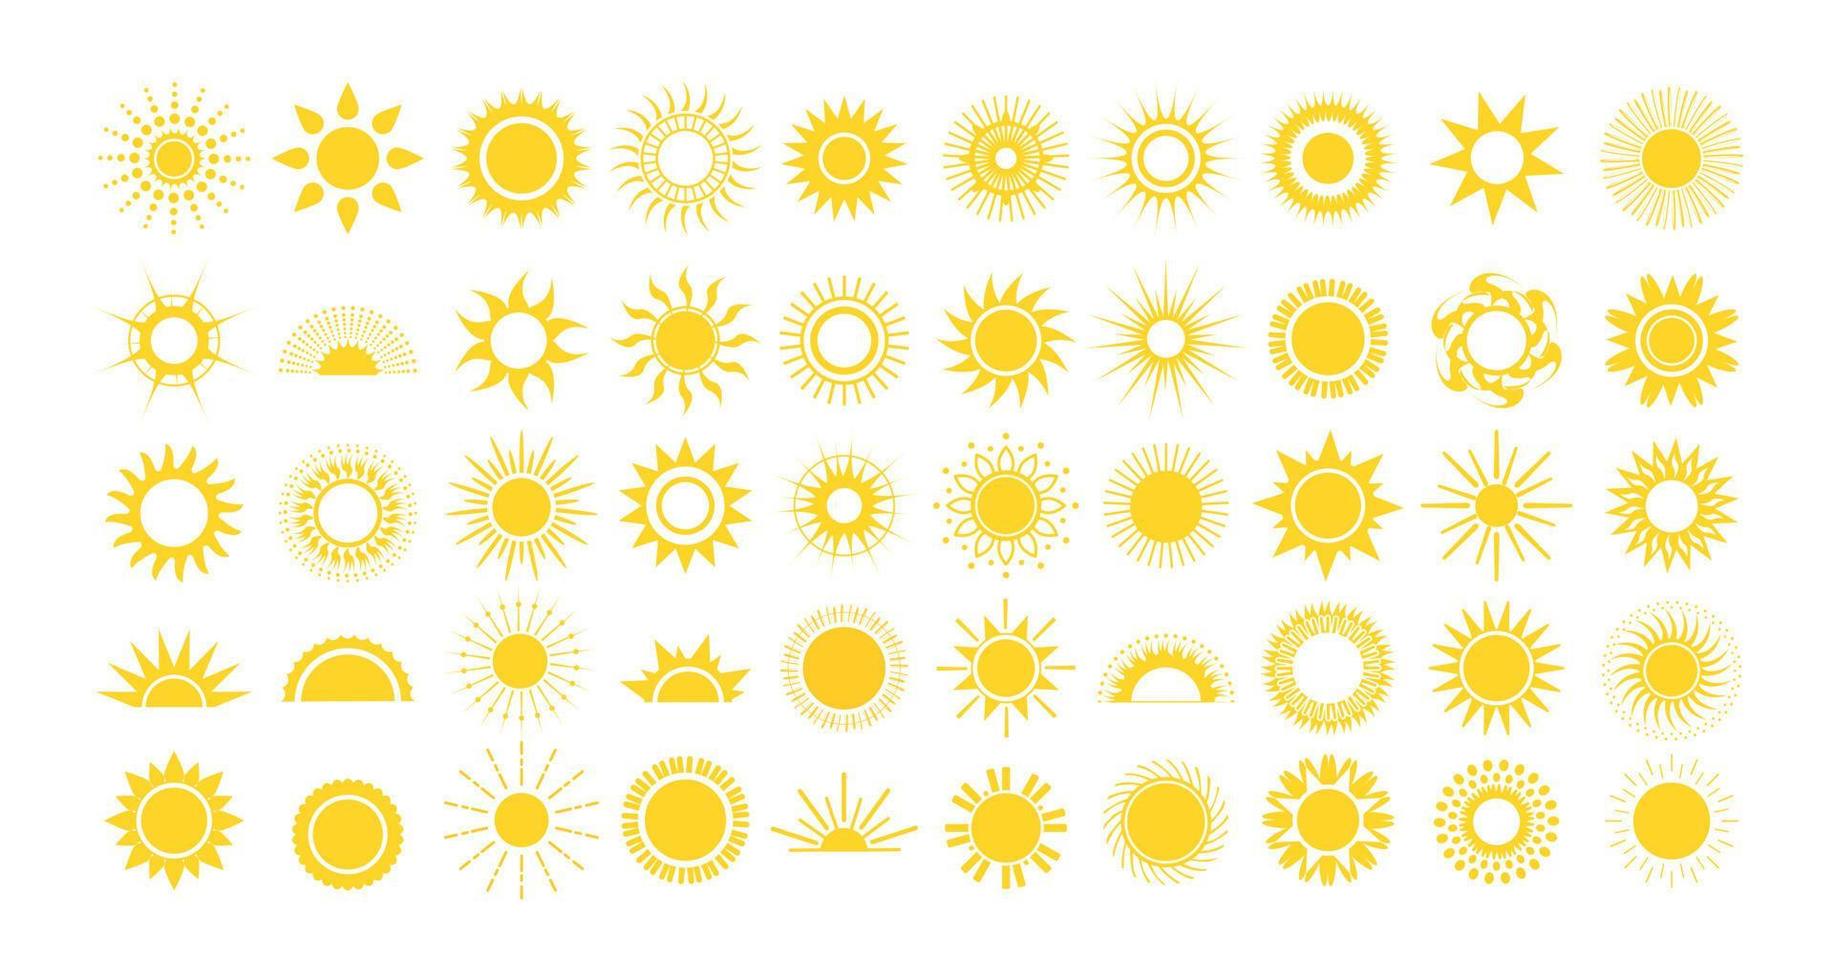 Icons of Suns vector